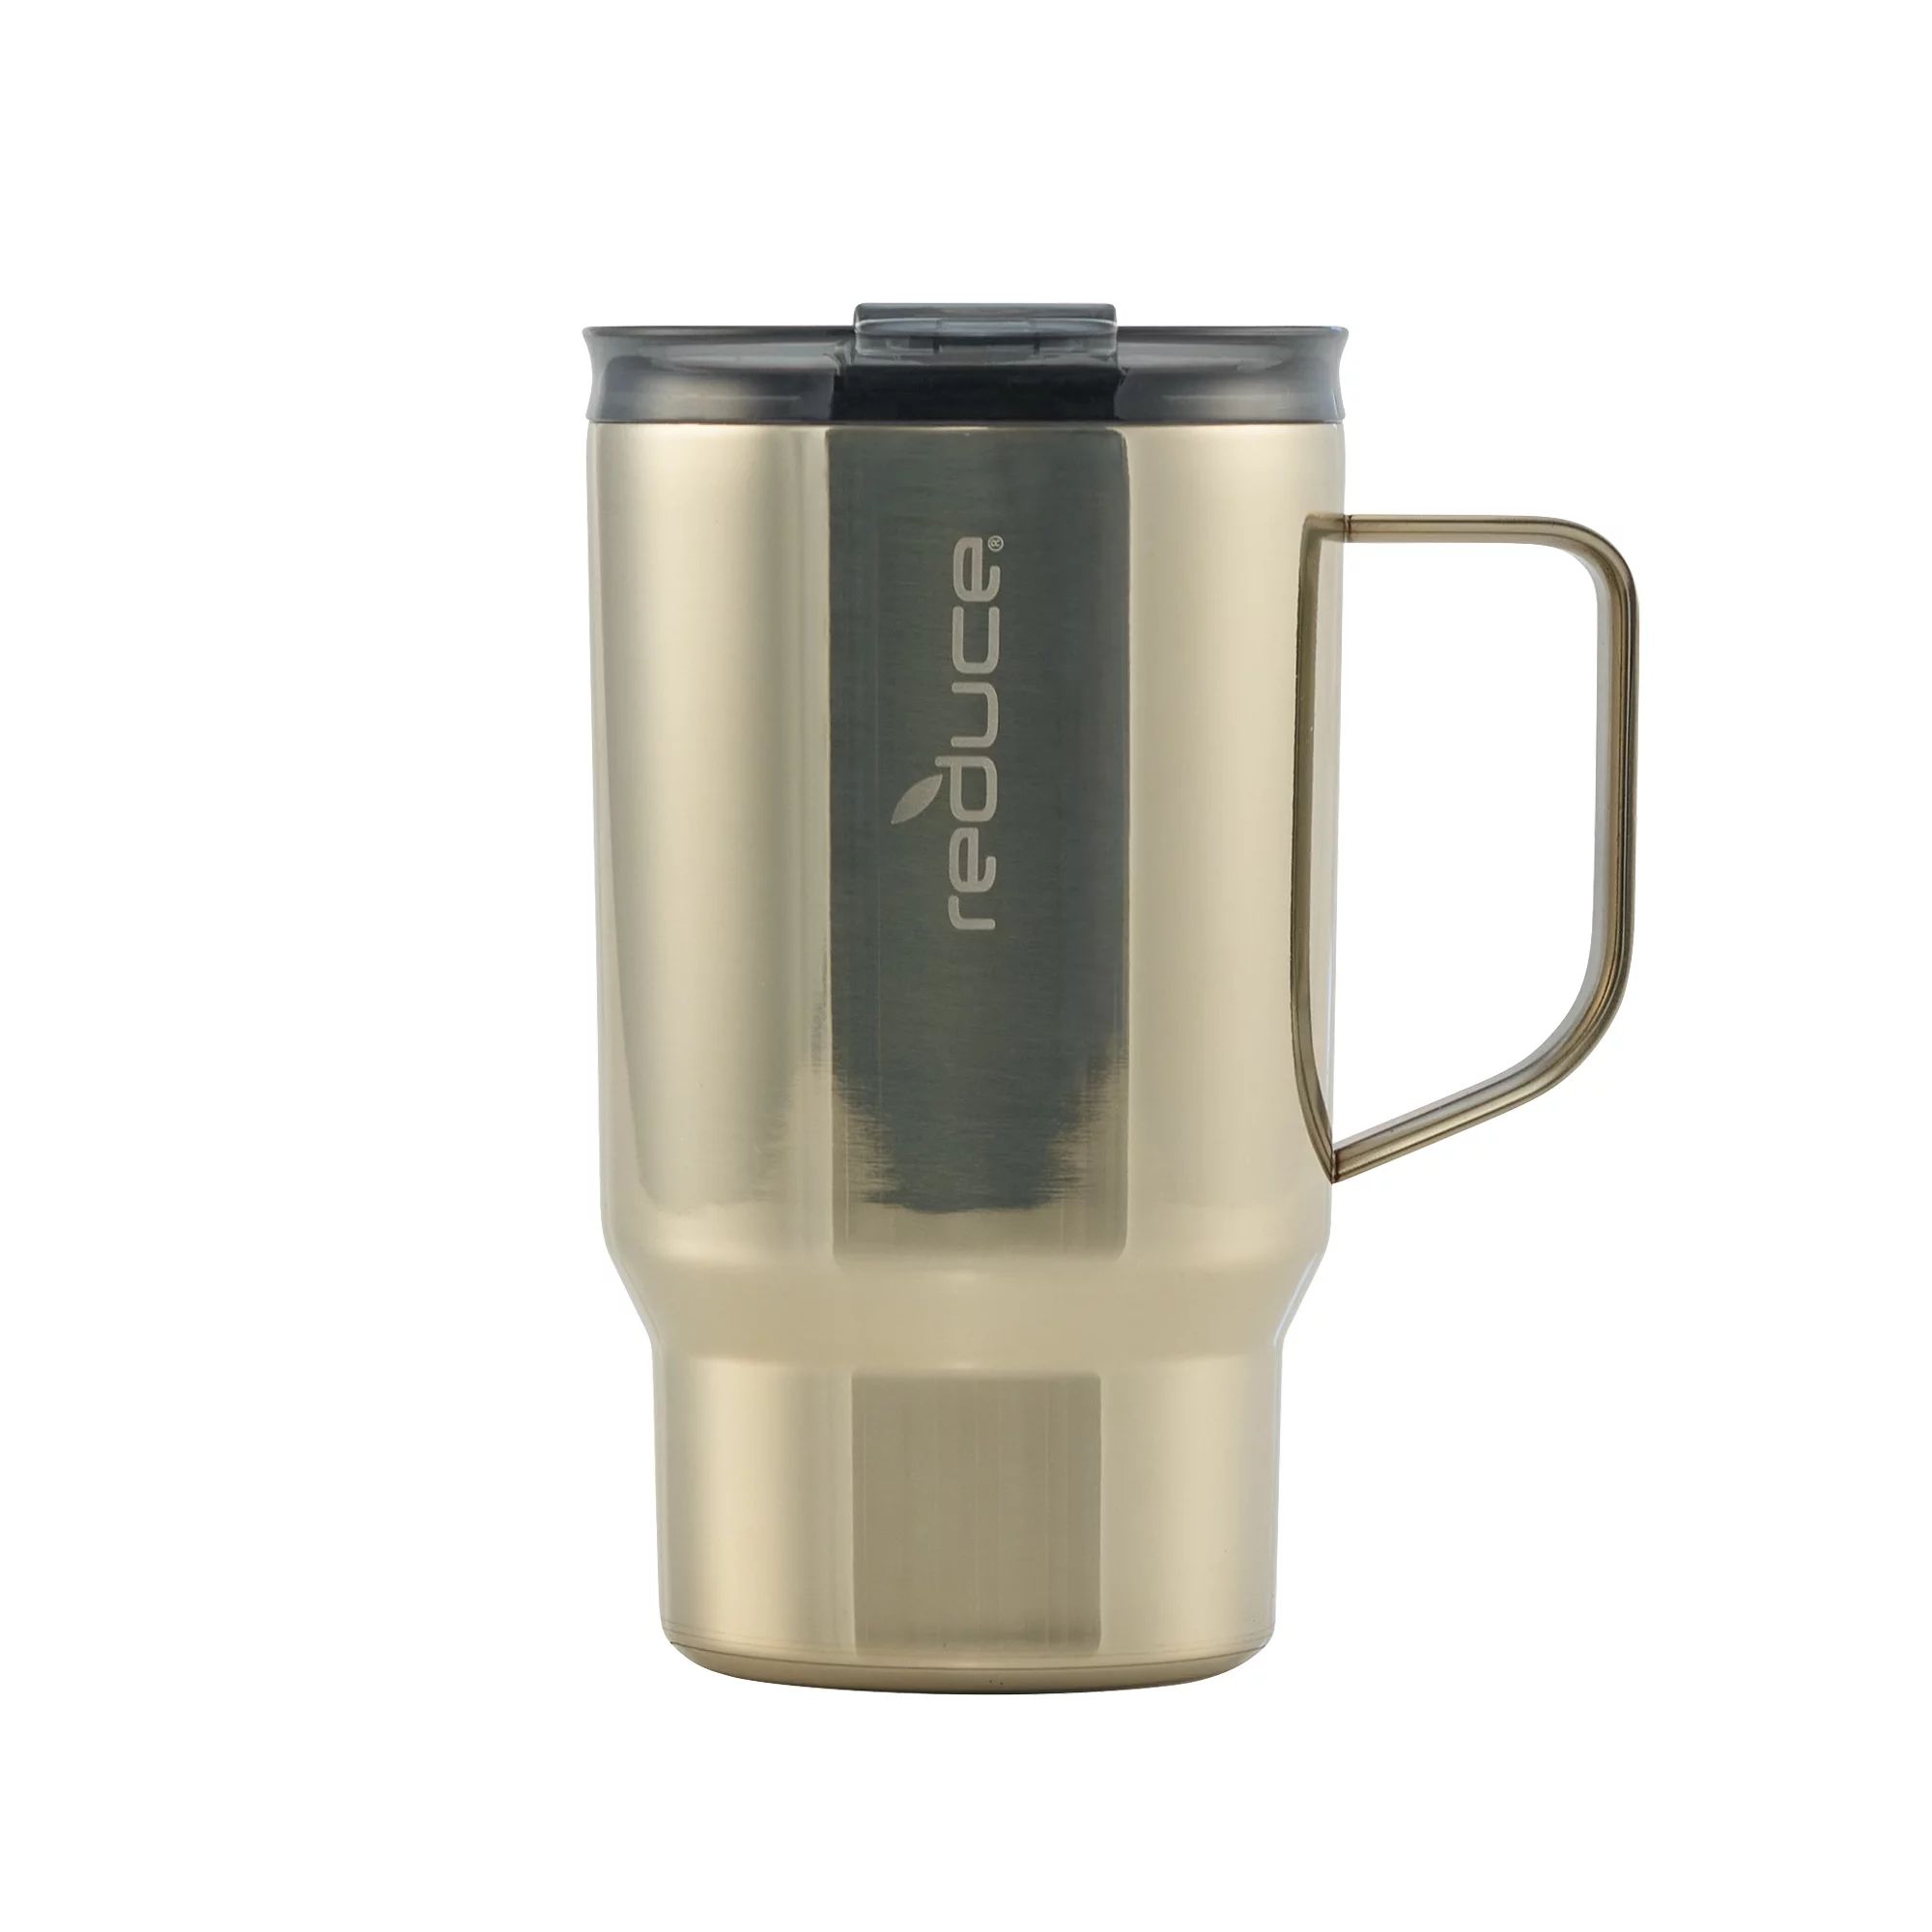 Reduce Vacuum Insulated Stainless Steel Hot1 Mug with Lid and Handle, Champagne, 18 oz. | Walmart (US)